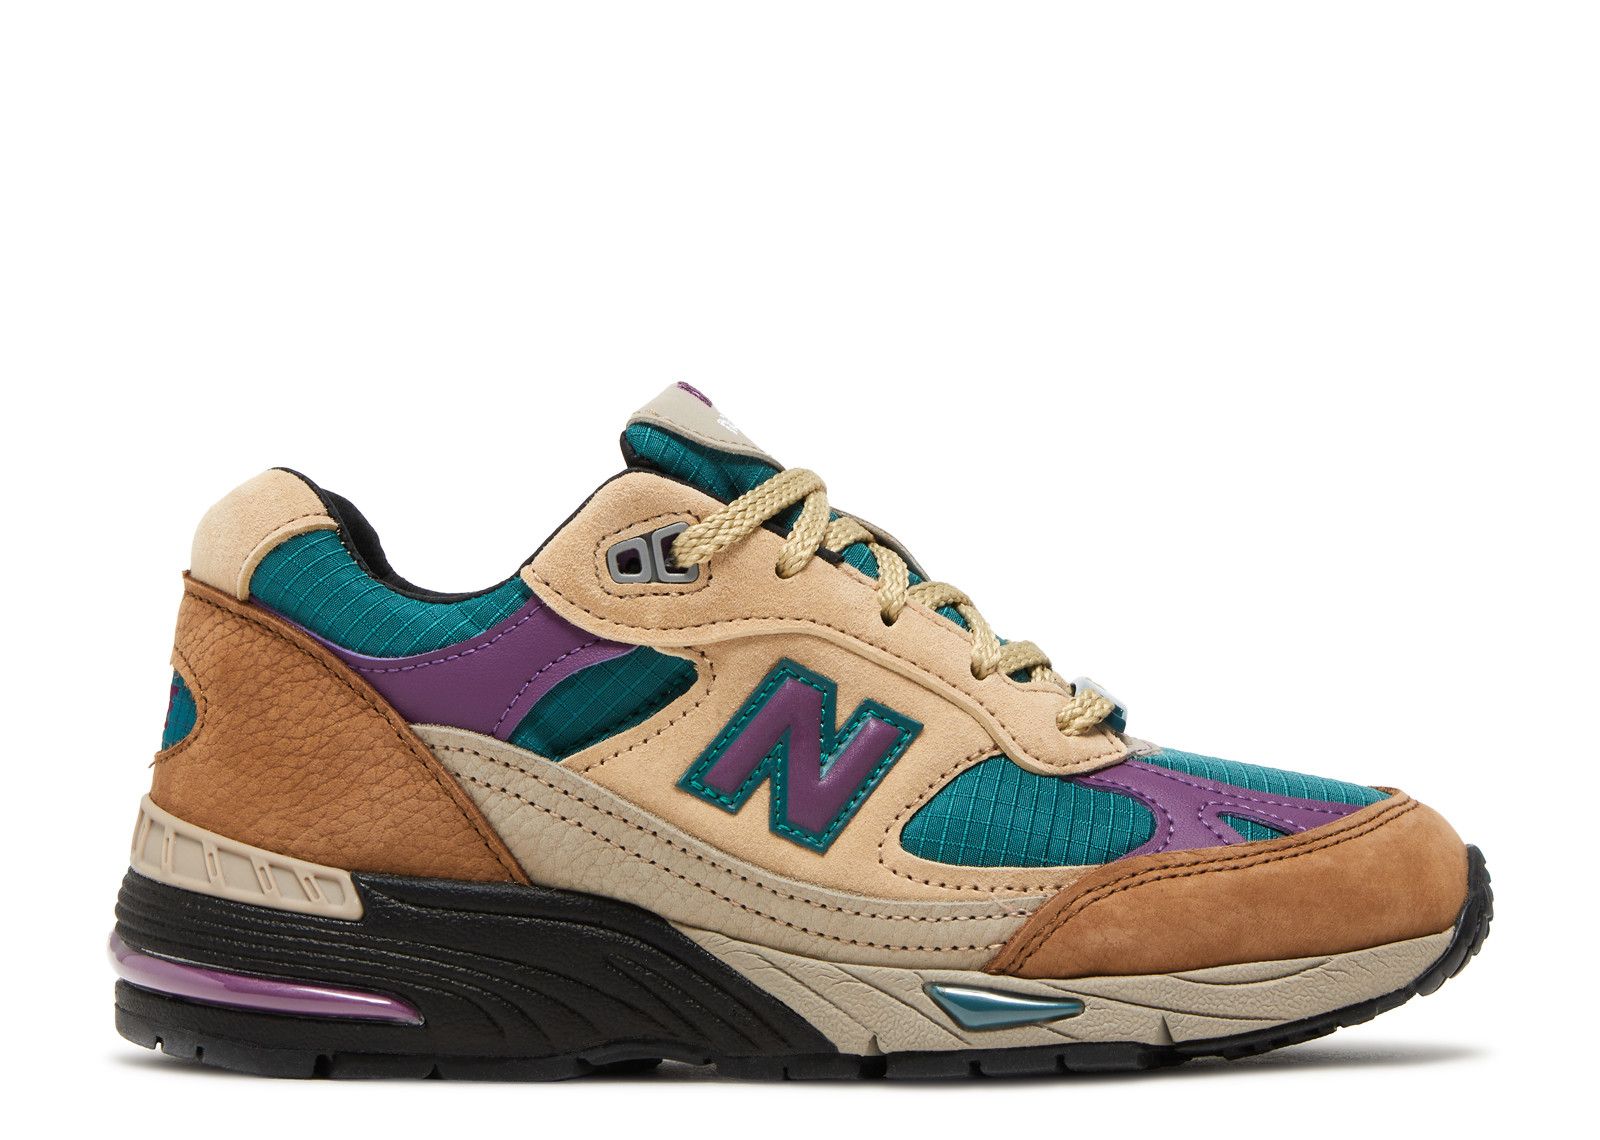 Palace X Wmns 991 Made In England 'Taos Taupe Grape' - New Balance ...